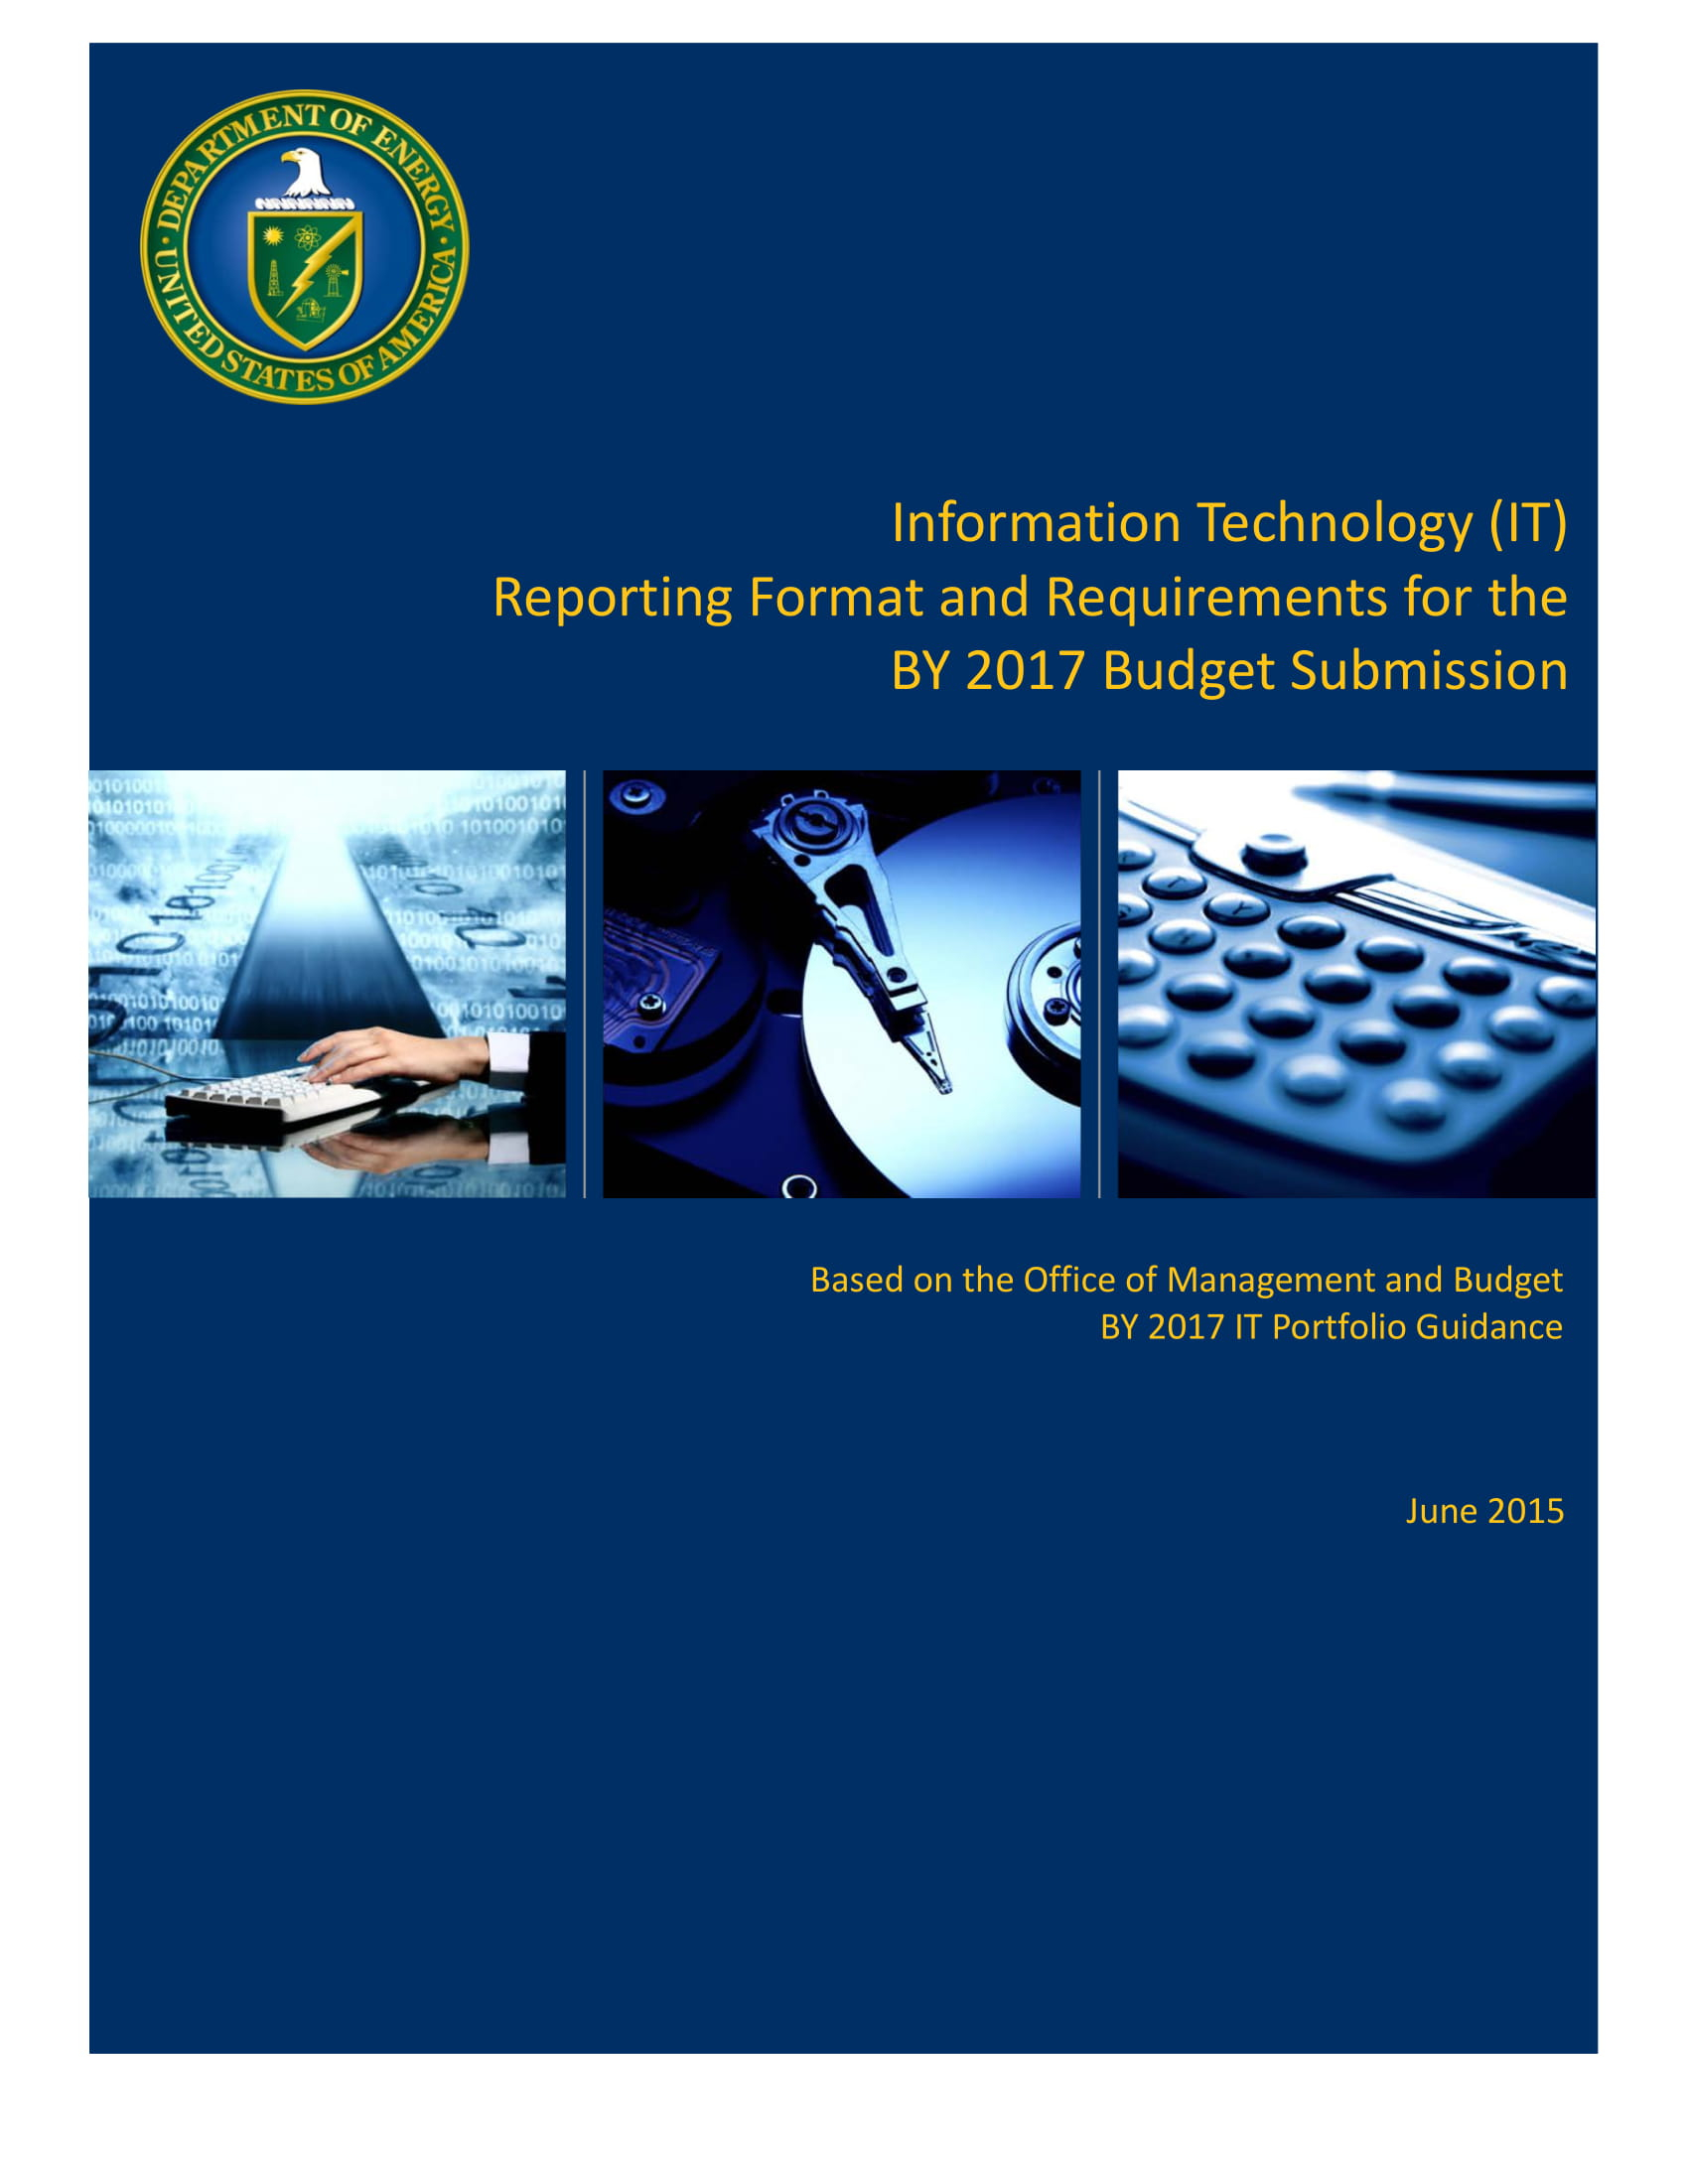 IT Management Report Template - 10+ Examples, Format, Pdf  Examples Pertaining To It Management Report Template